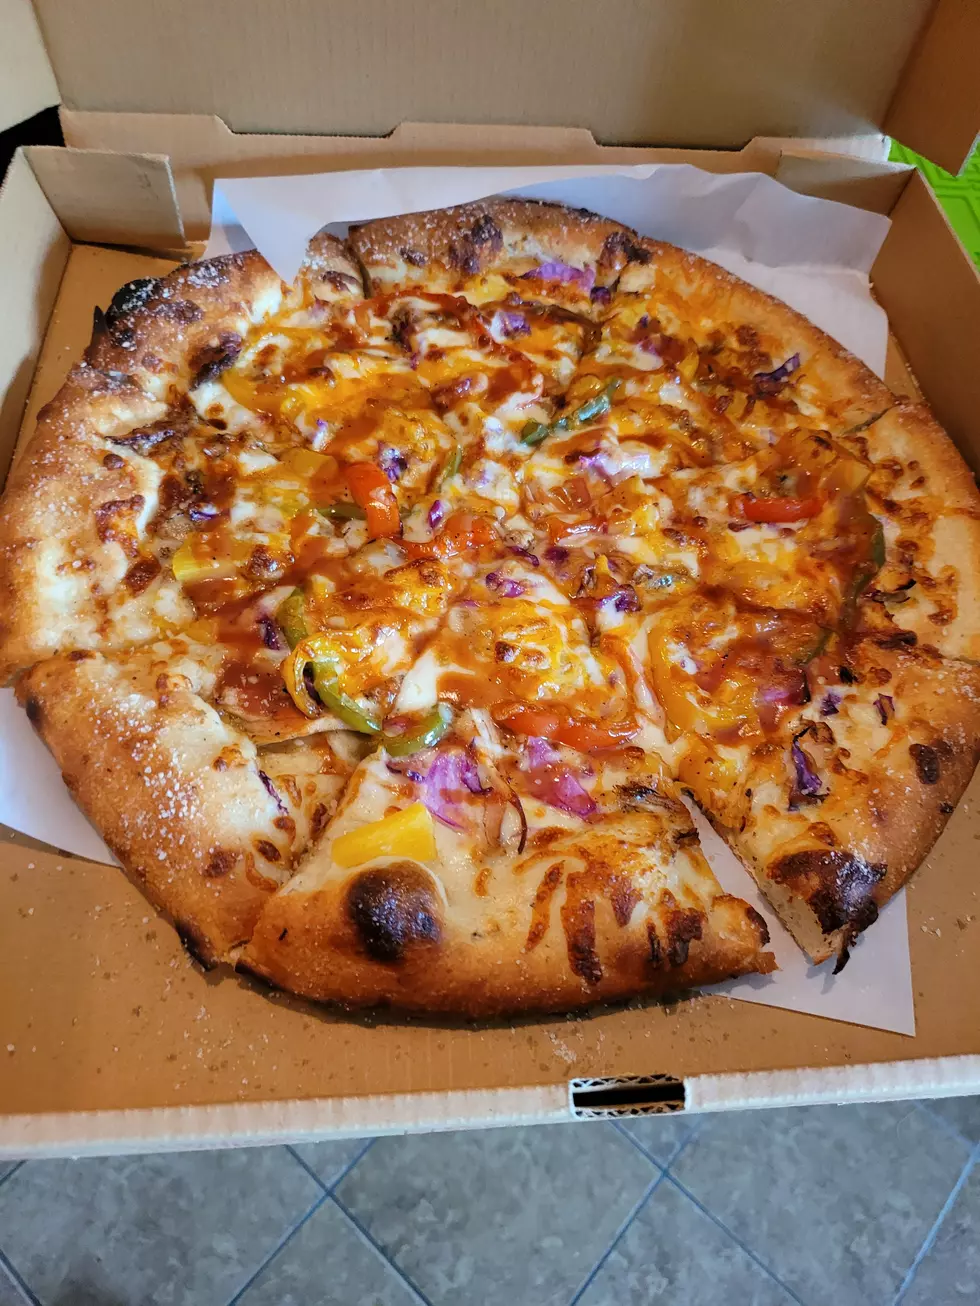 Want to Try Something Unique in Wichita Falls? Pick up a Caribbean Jerk Pizza